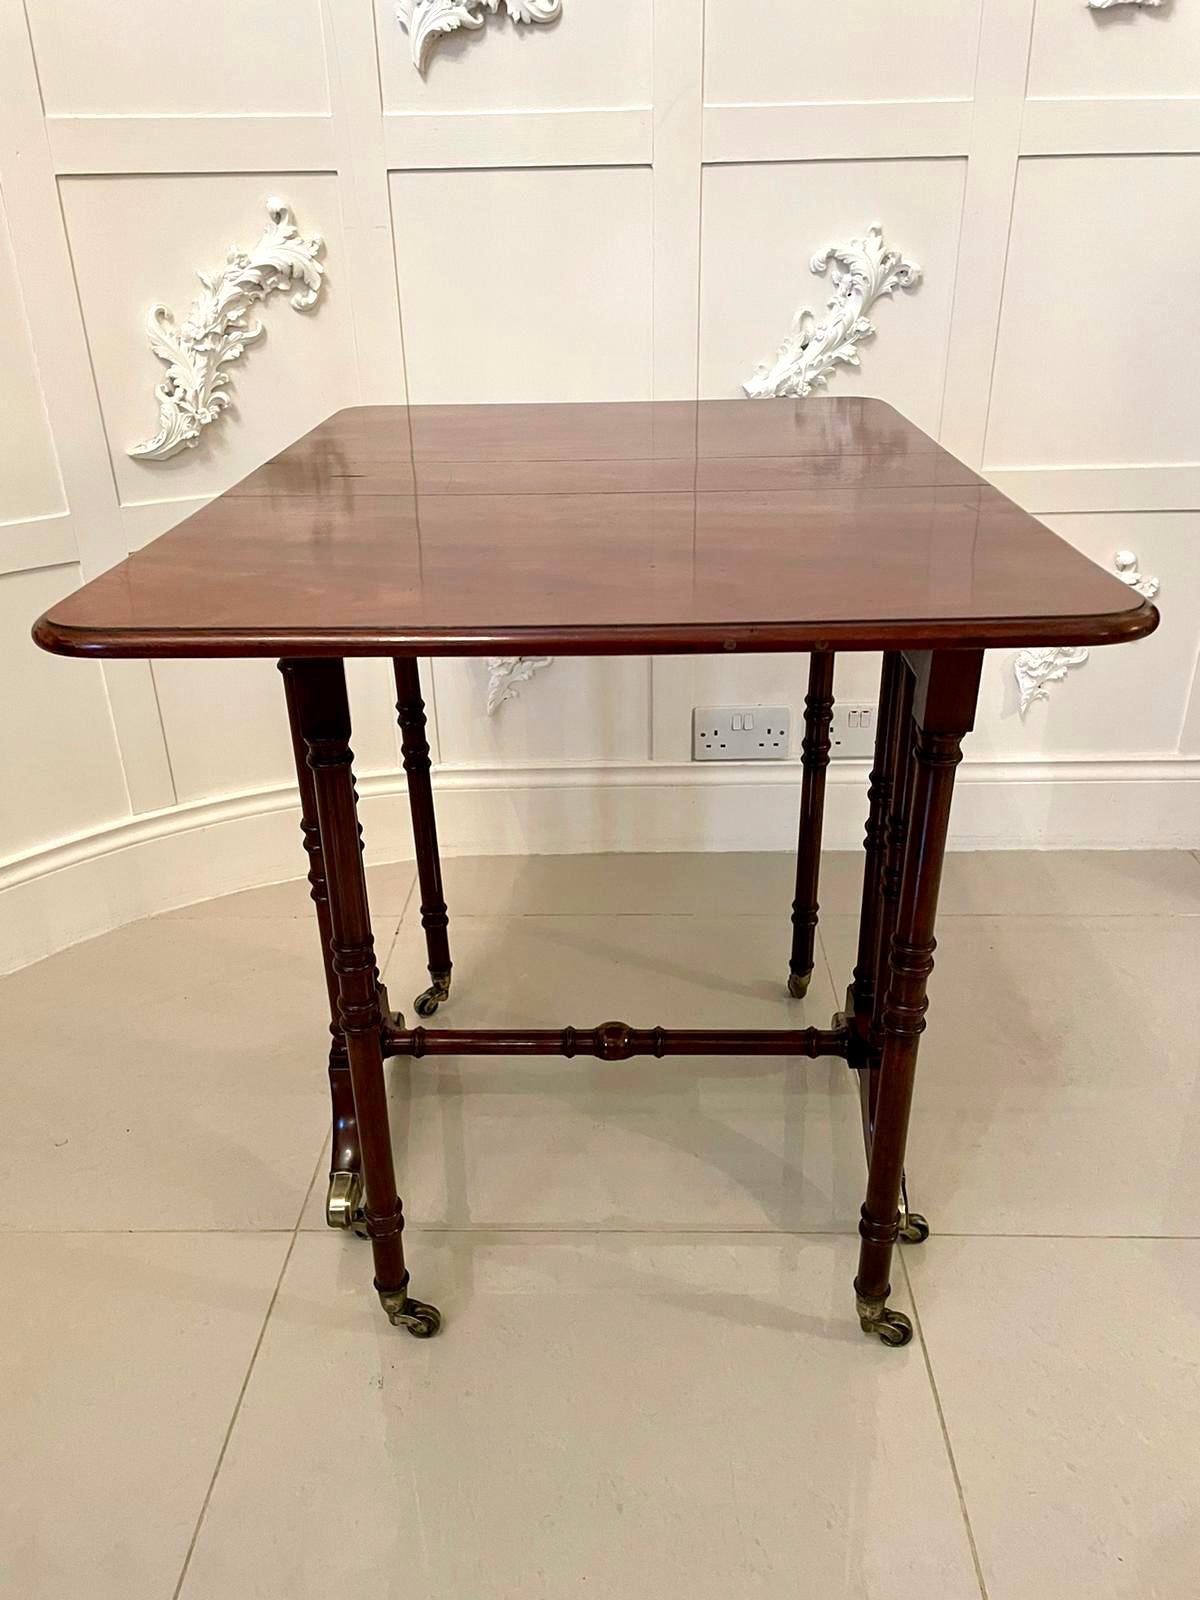 Antique Early 19th Century George III Mahogany Spider Leg Drop-Leaf Table For Sale 2